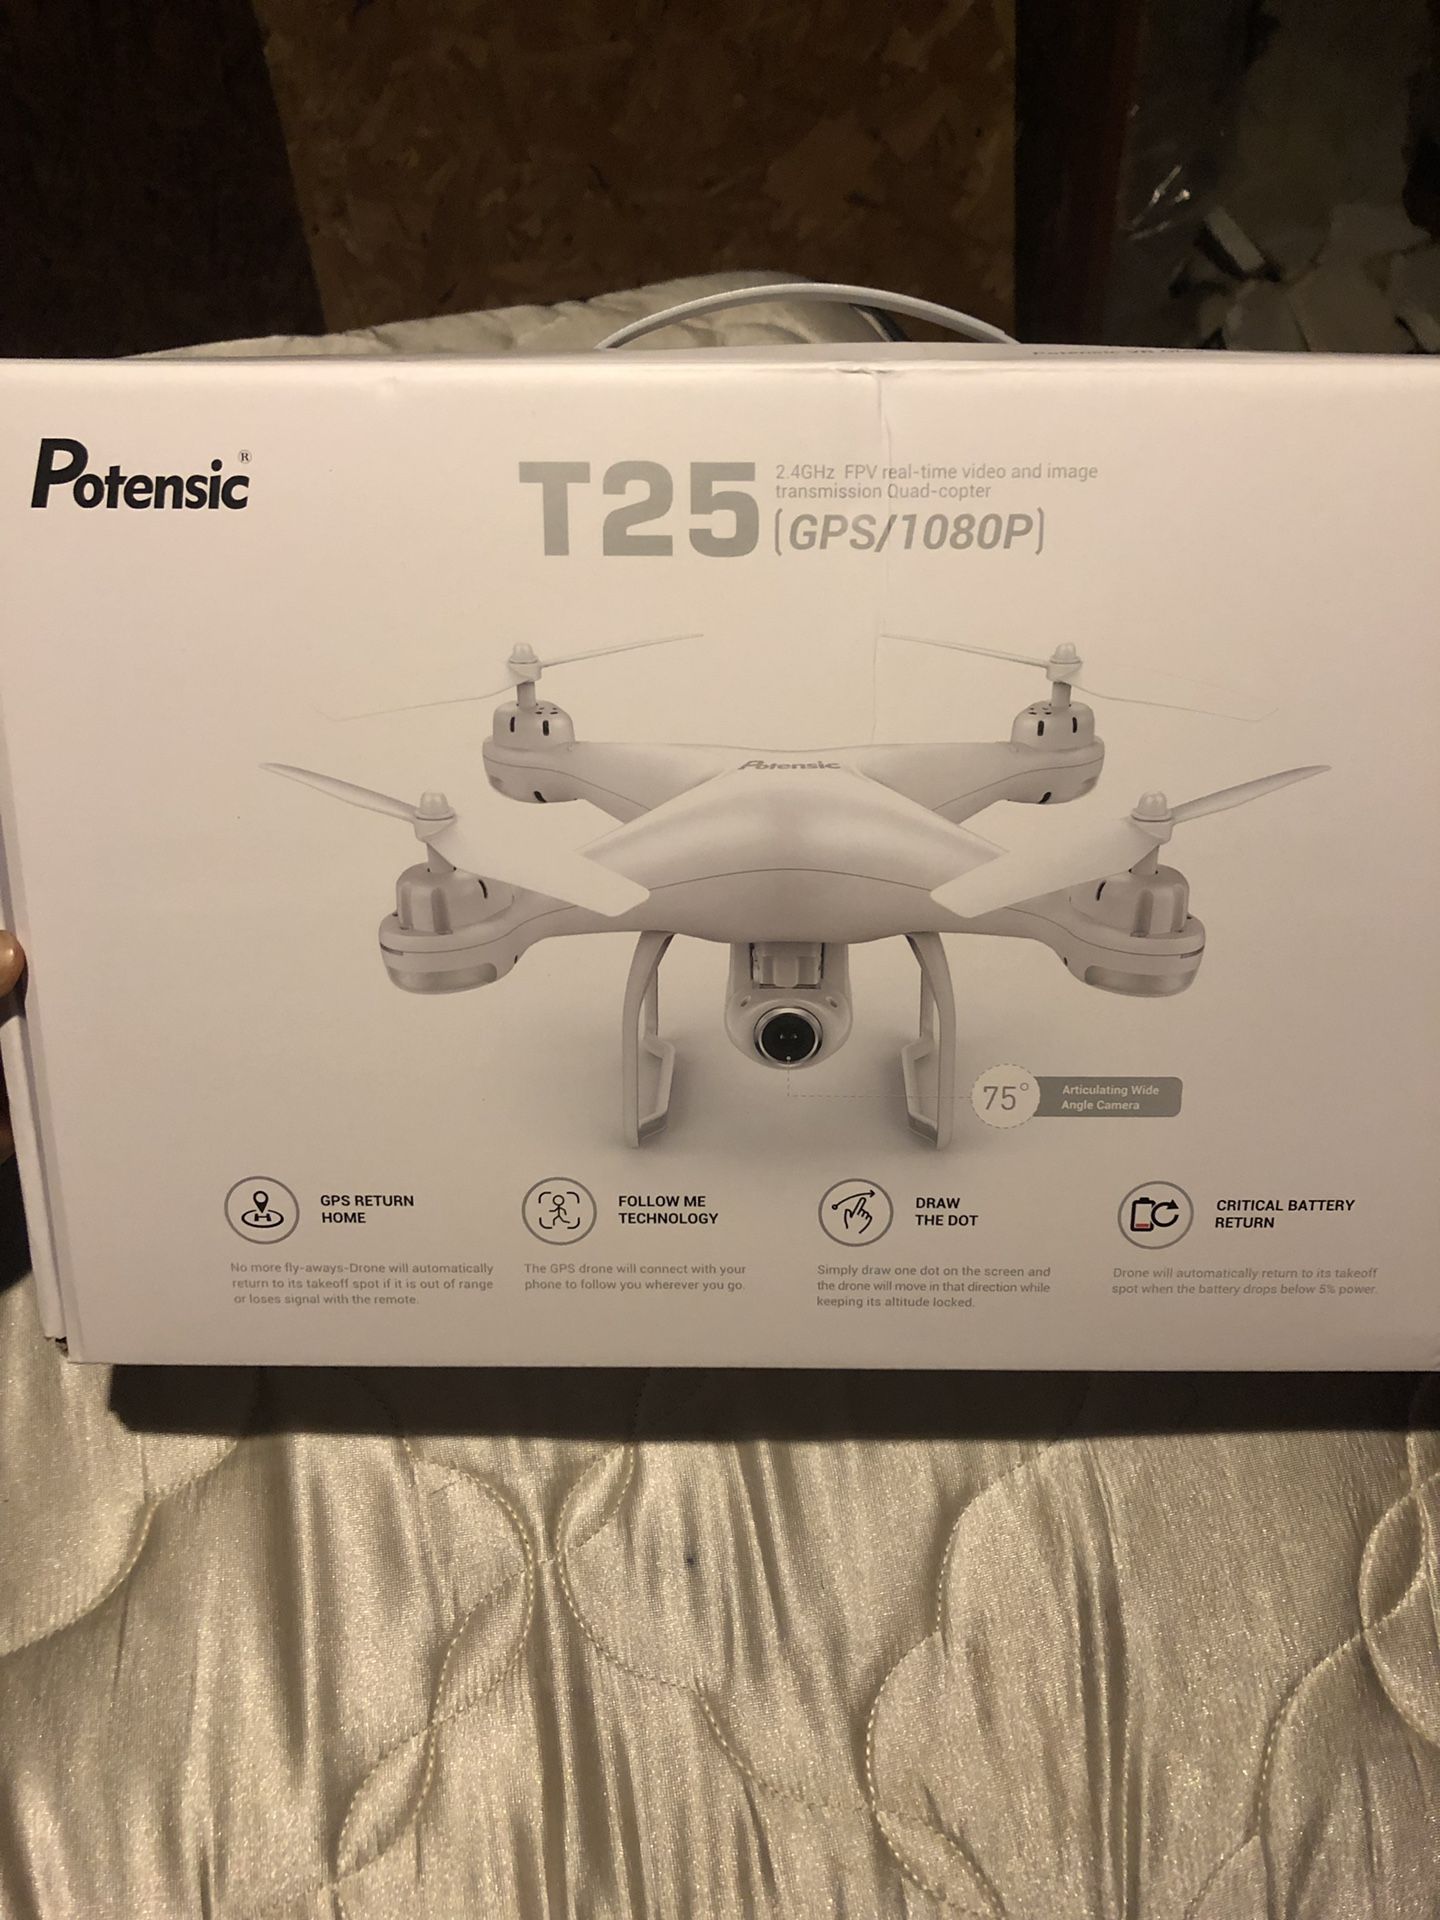 Potensic T25 Drone, GPS installed